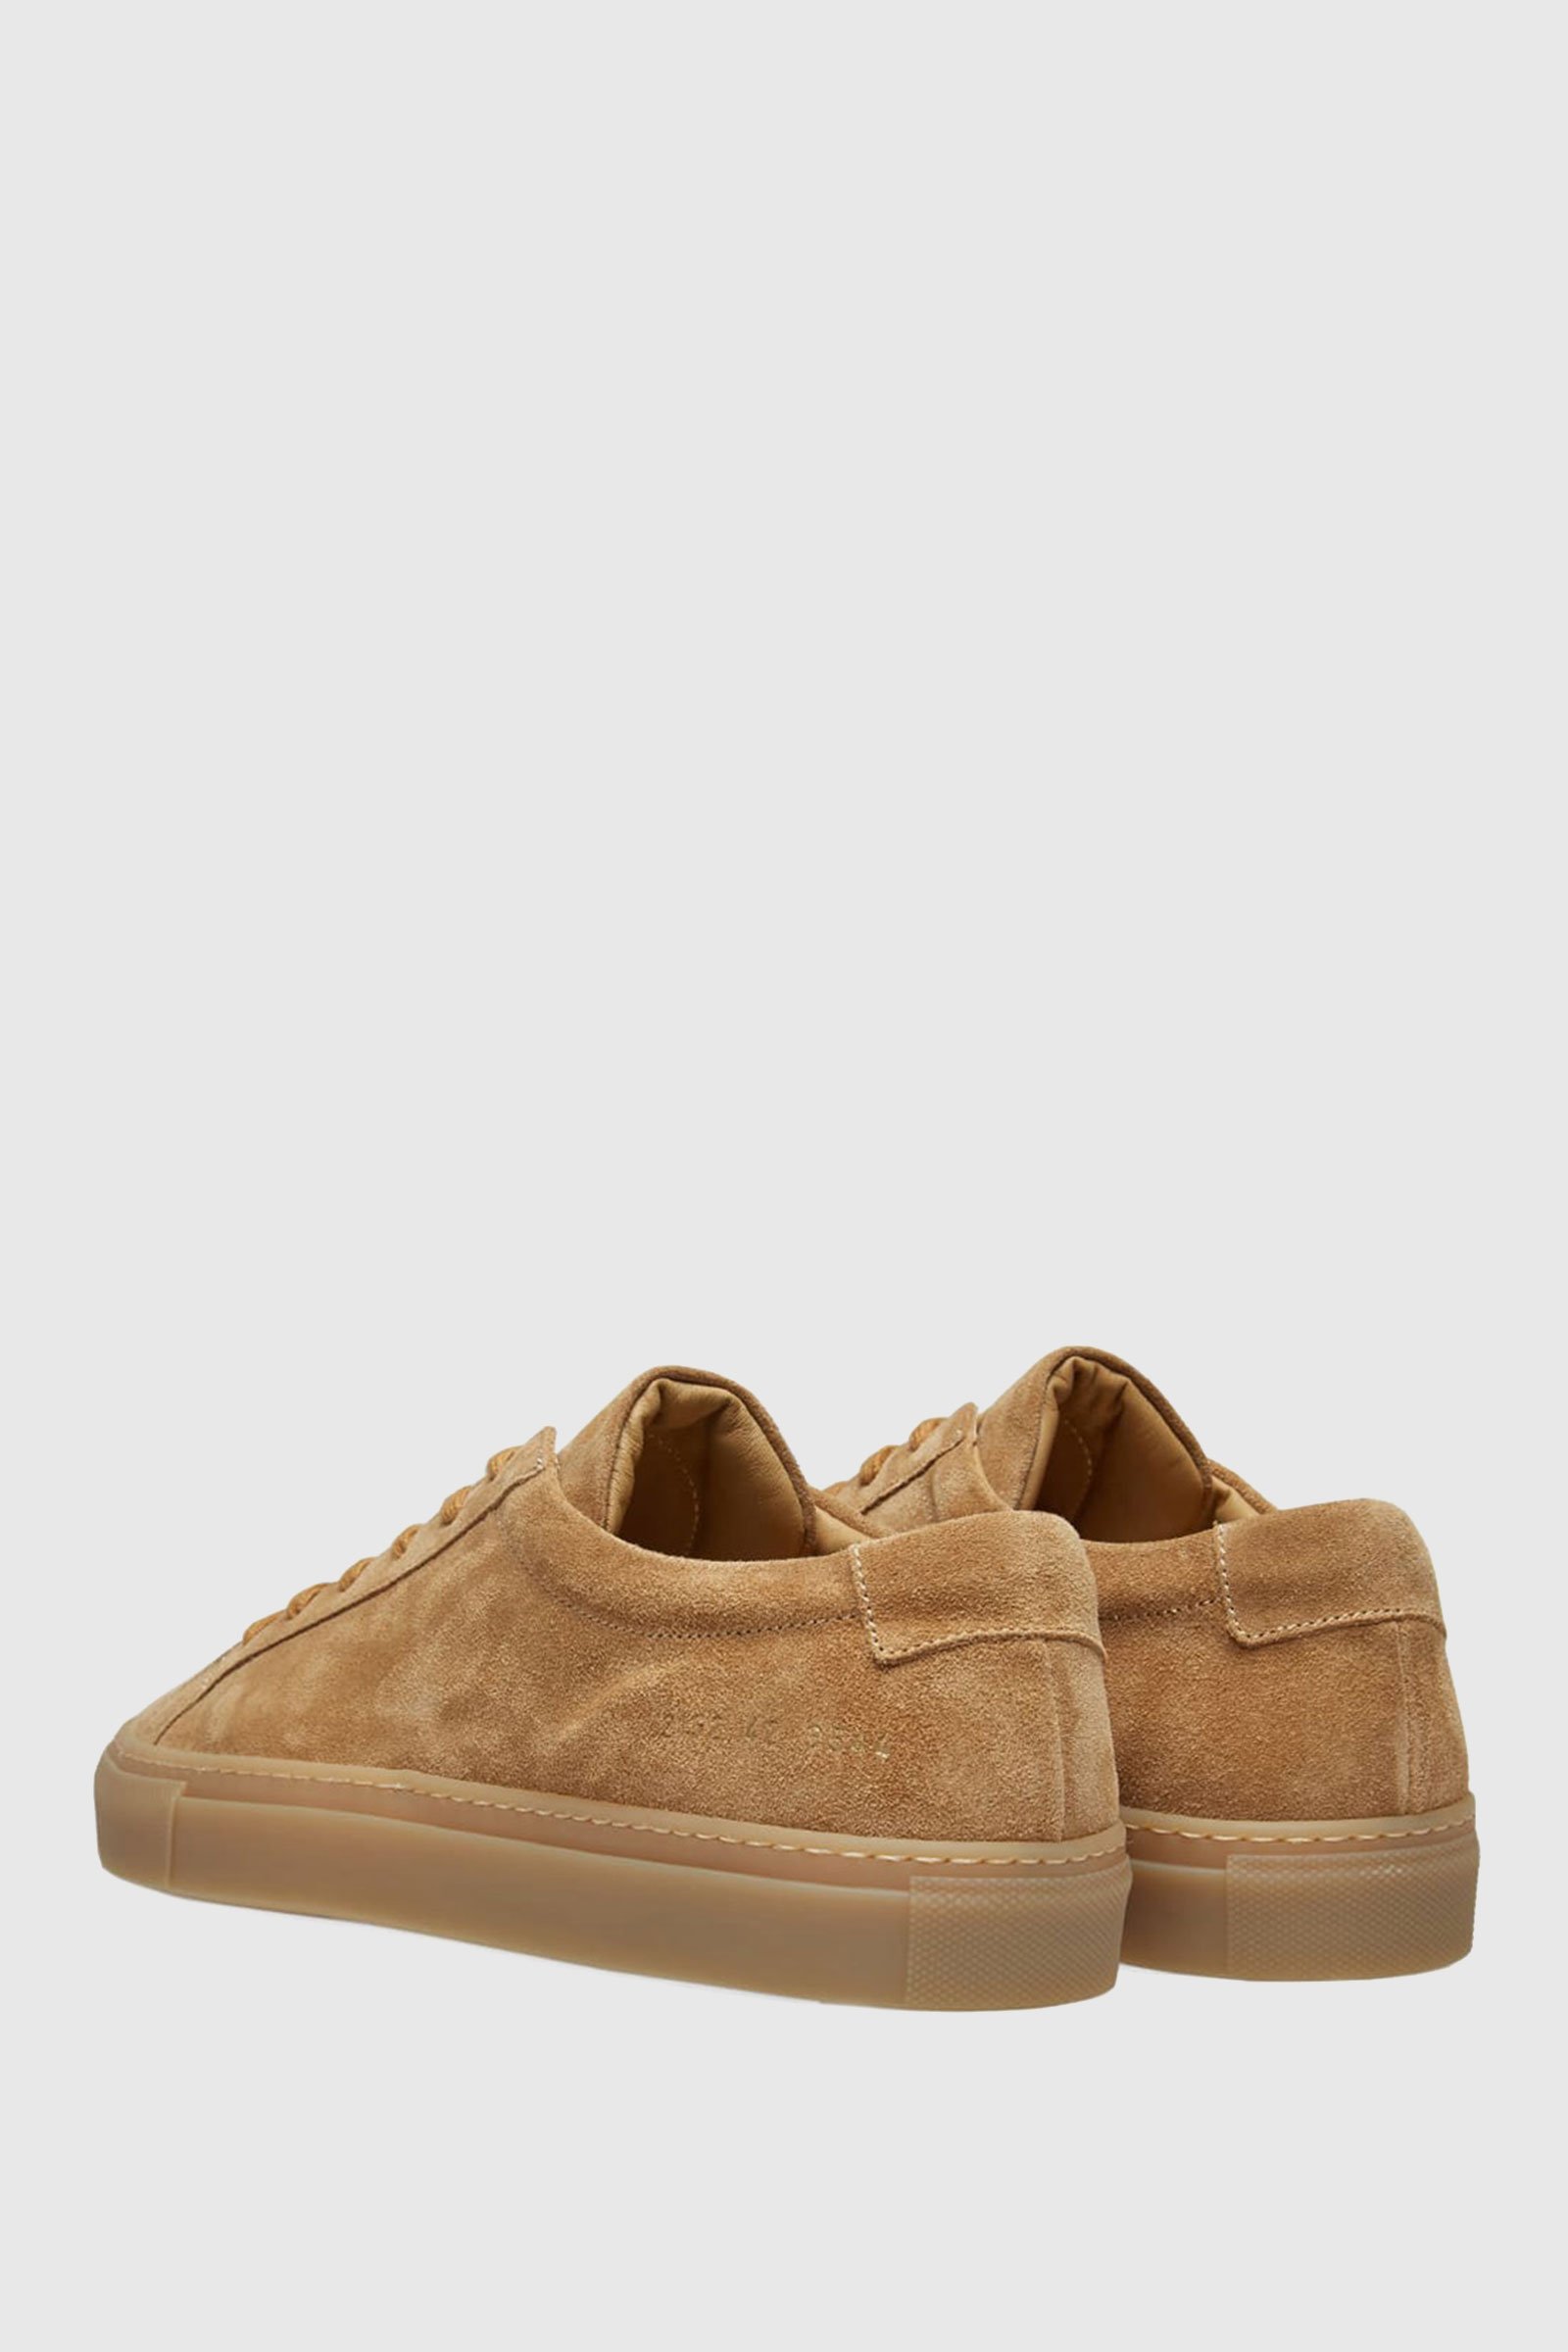 common project suede sneakers